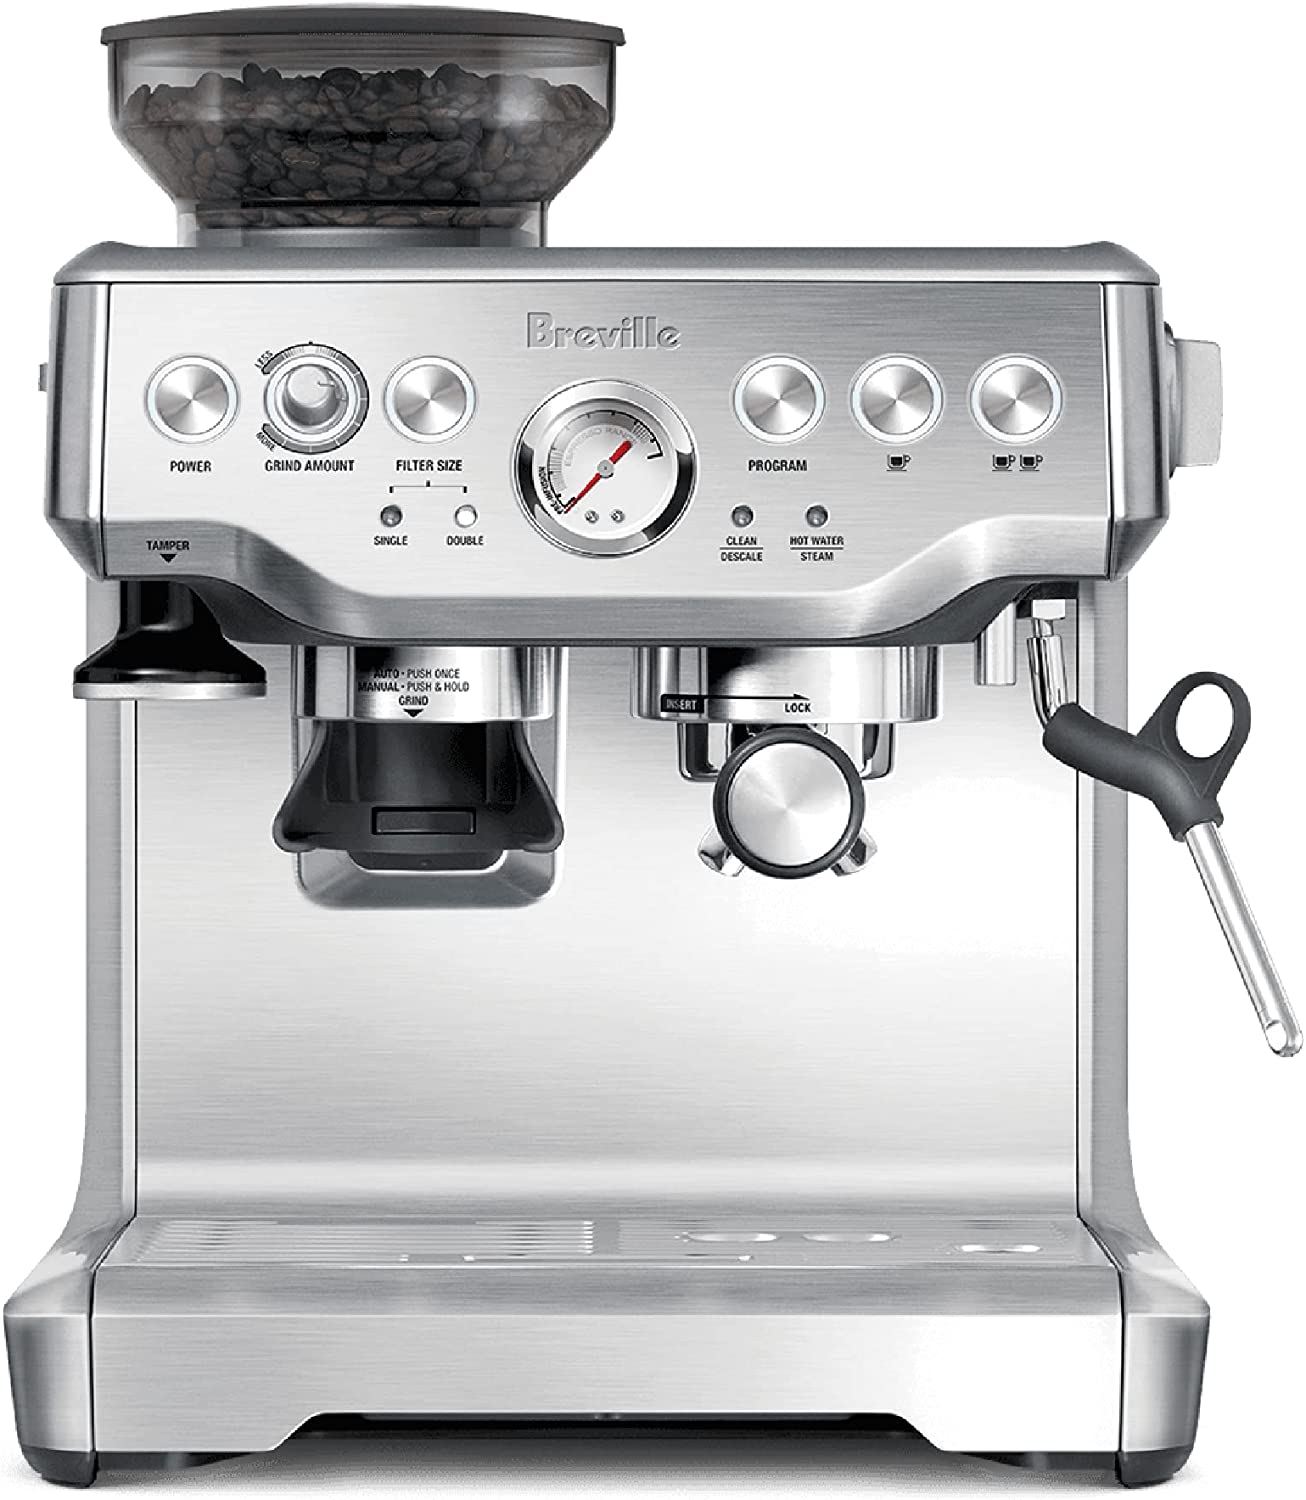 Espresso, French Press, or Drip? How to Pick the Right Coffee Maker for You